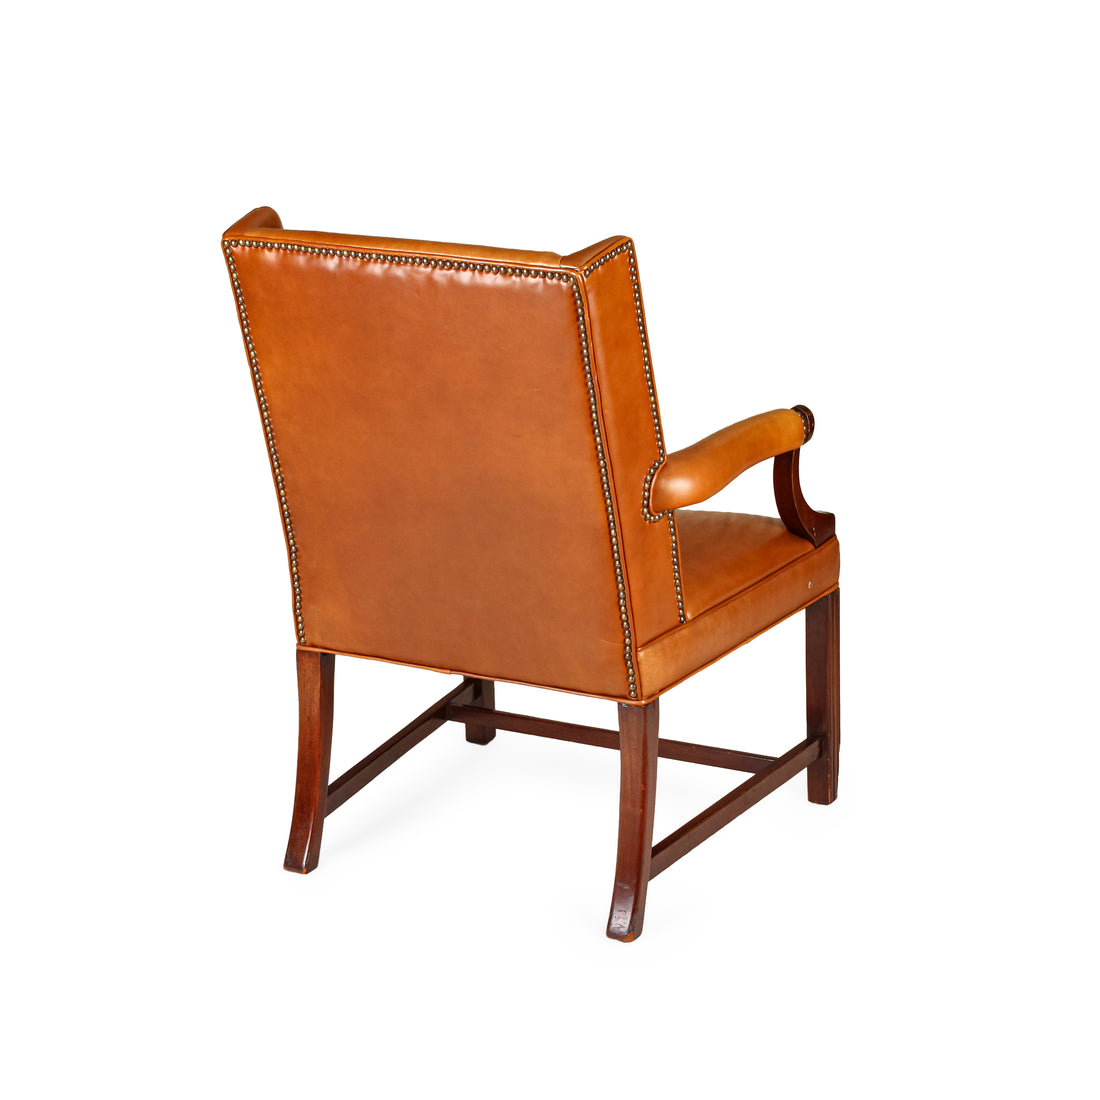 Wood Framed Tan Leather Armchairs - Set of 2